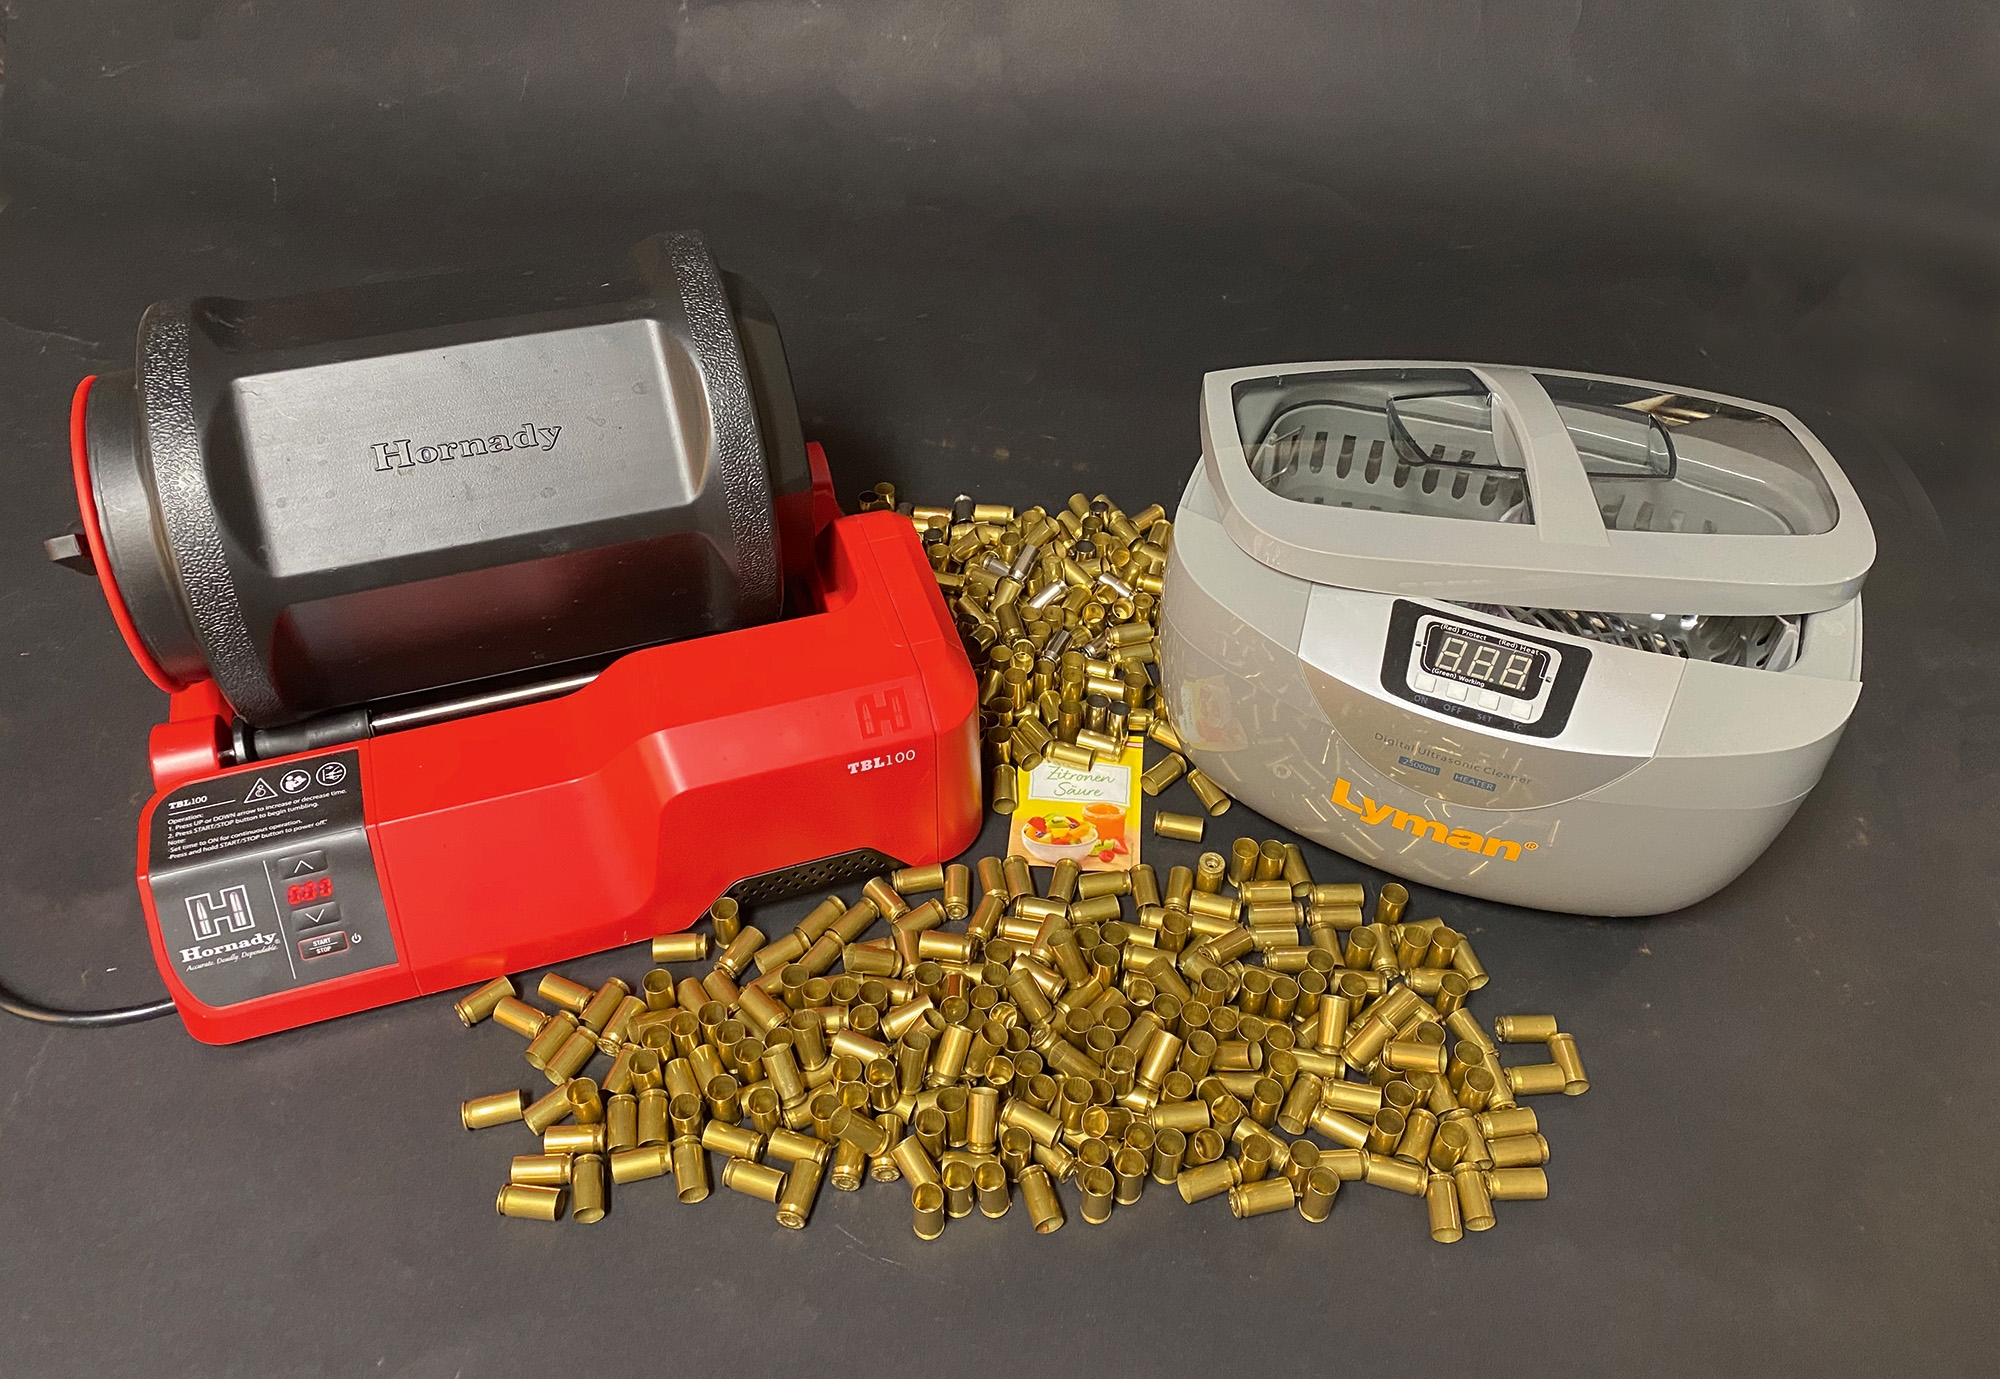 Hornady One Shot Sonic Cleaner Ultrasonic Firearms Cleaning Solution